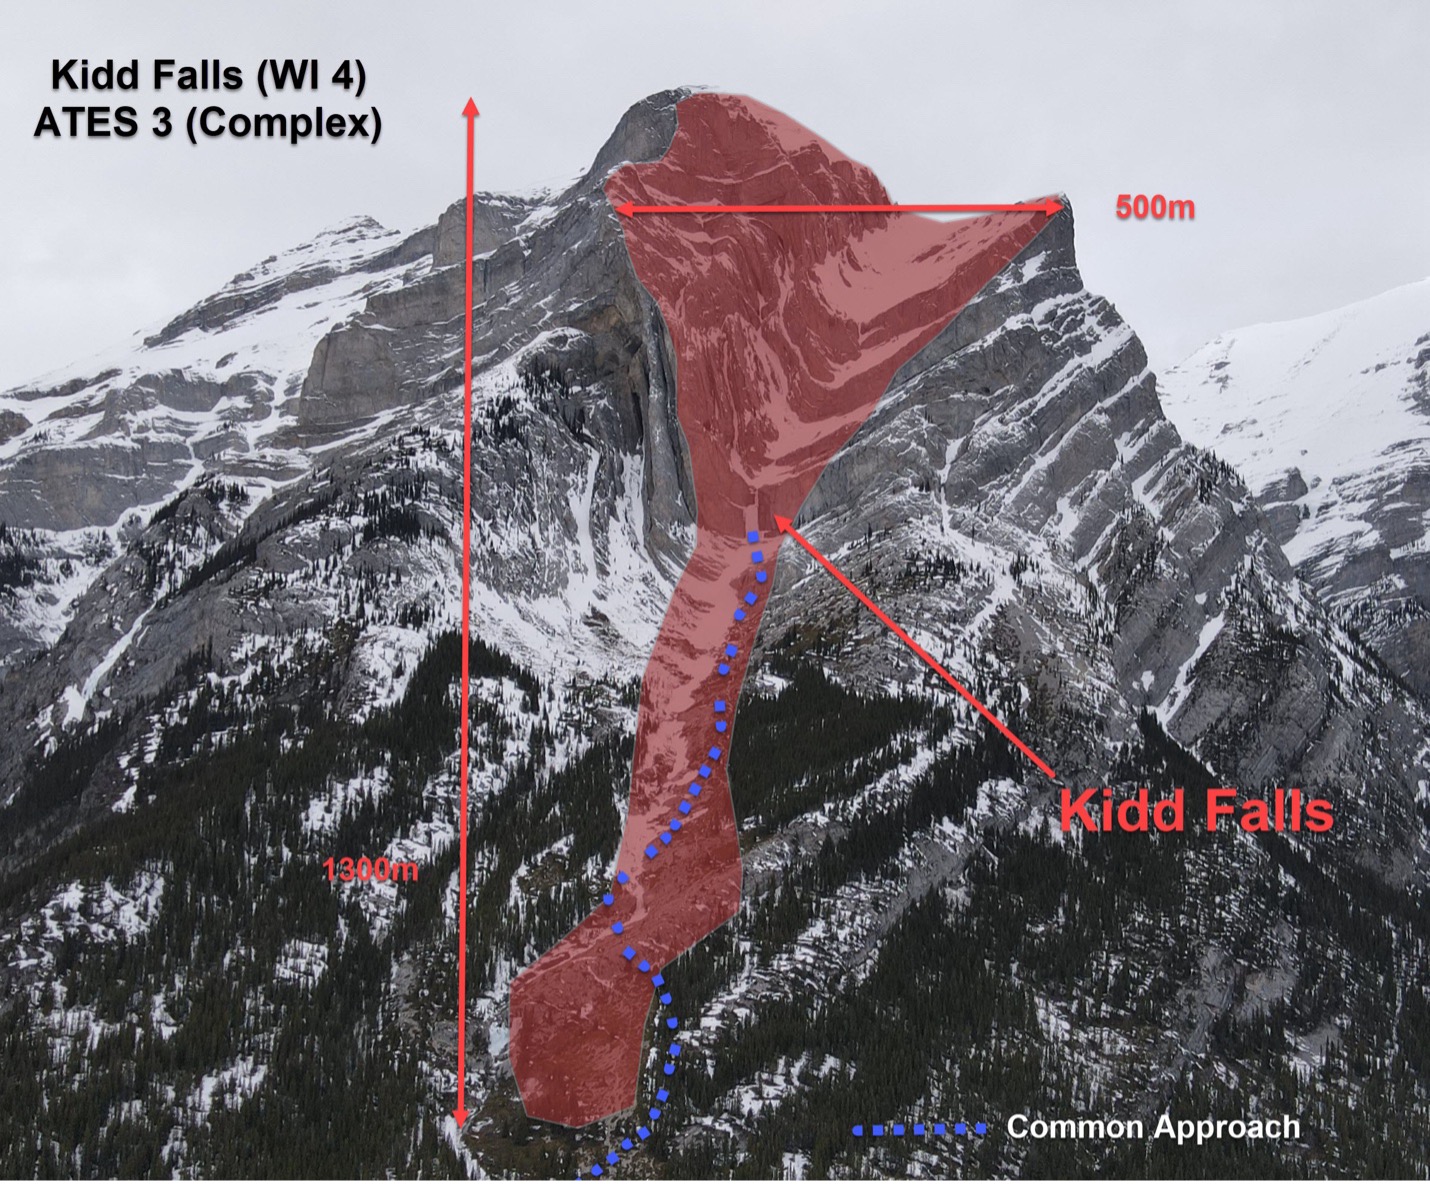 Image shows Kidd Falls ice climb area, with avalanche terrain highlighted in red.